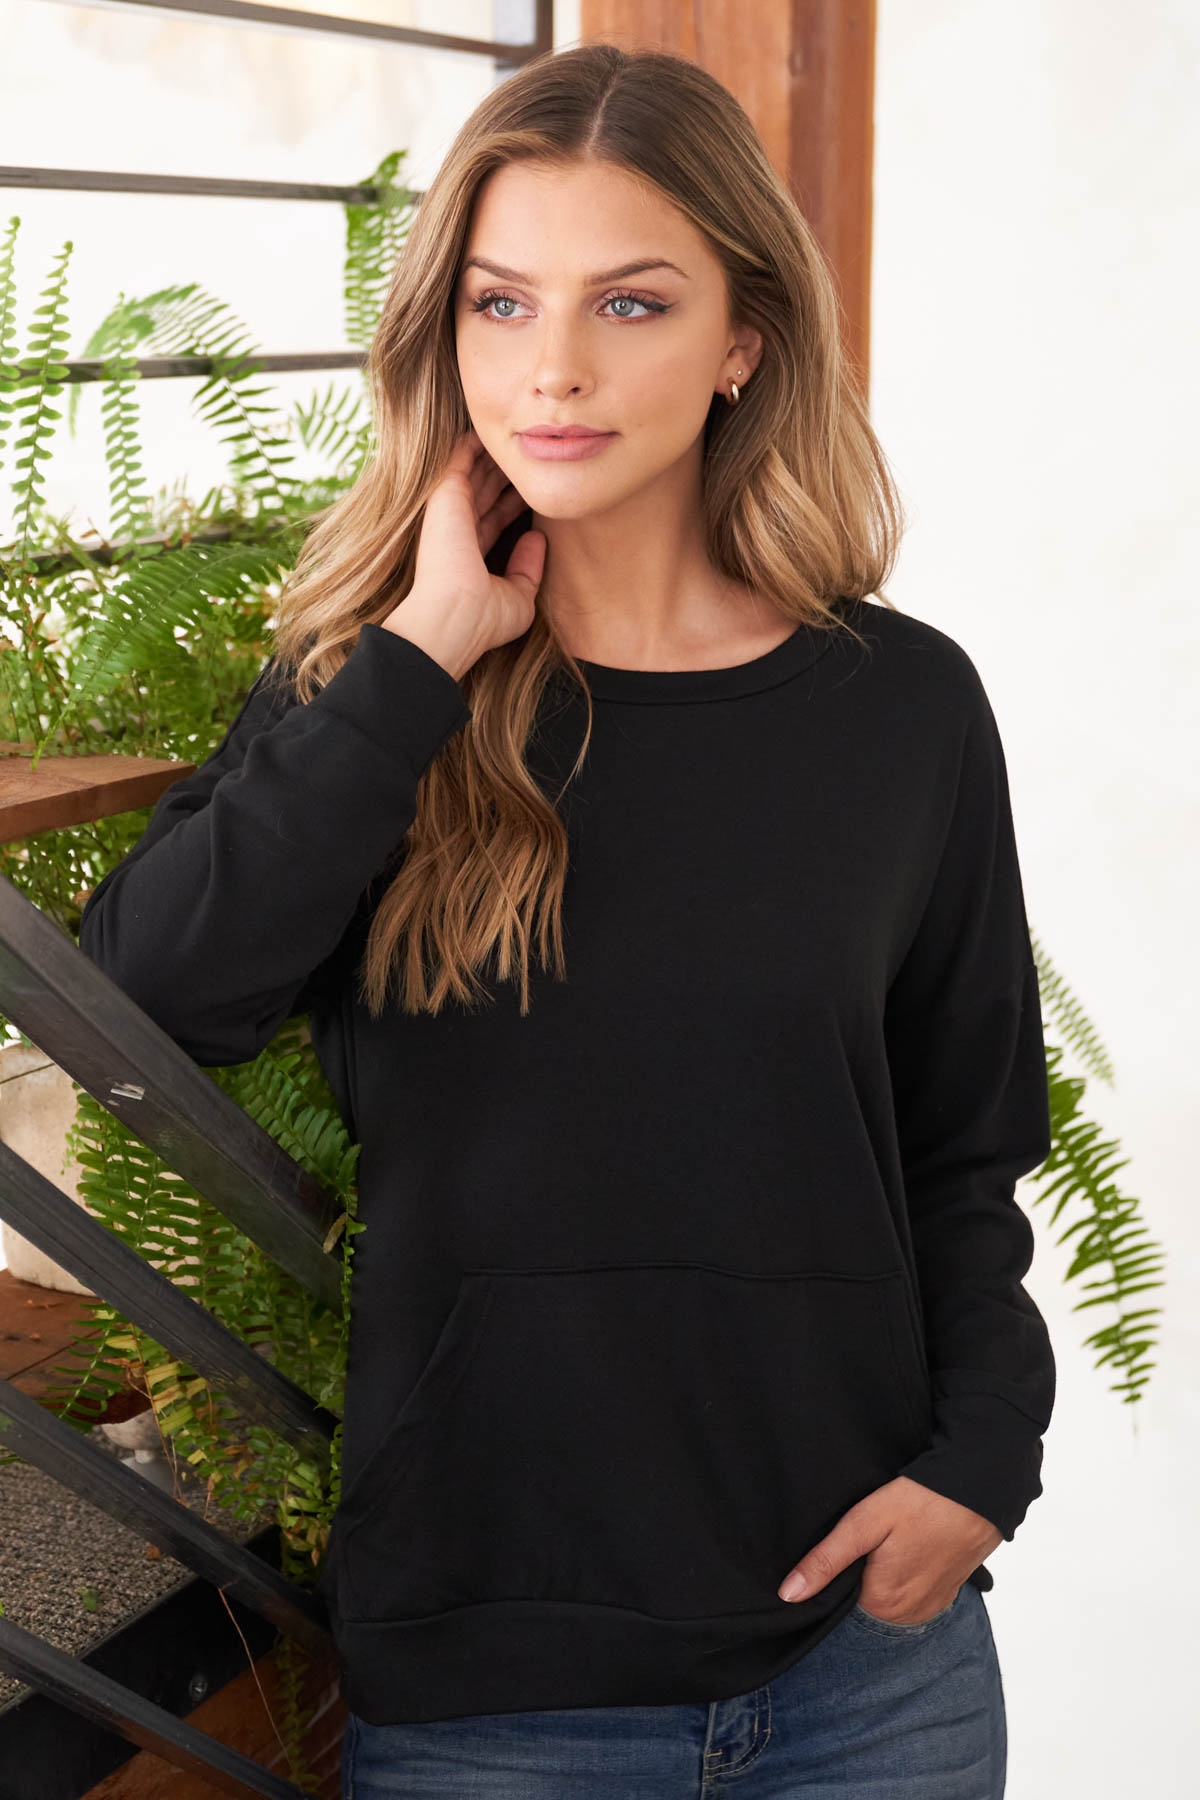 S10-12-4-PPT2063-FT-BKJT BLACK JET LONG SLEEVE FRENCH TERRY TOP WITH KANGAROO POCKET TOP 1-2-2-2